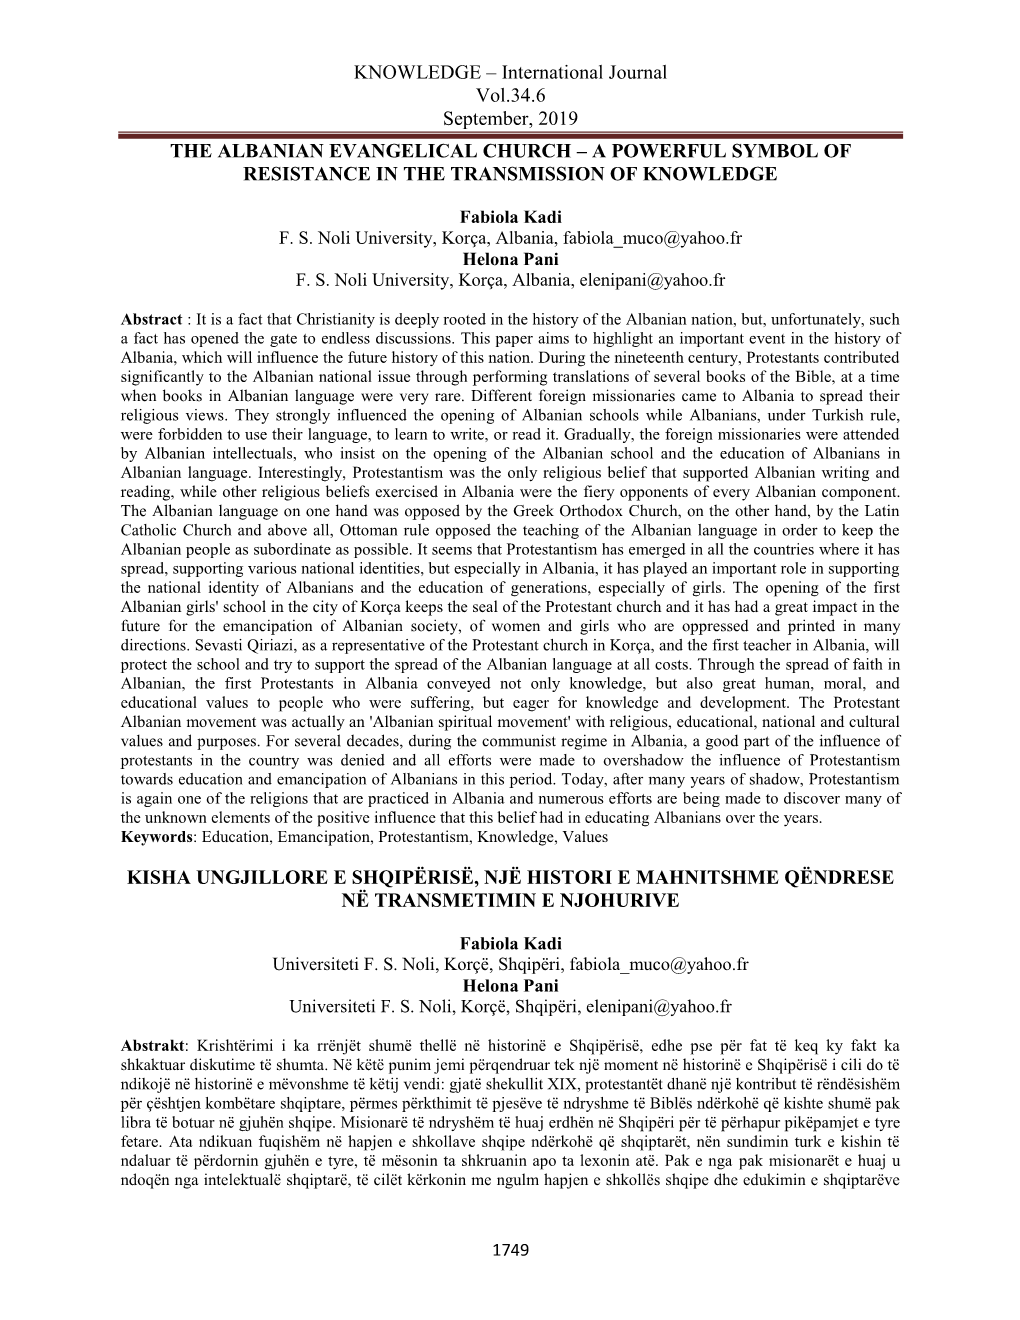 International Journal Vol.34.6 September, 2019 the ALBANIAN EVANGELICAL CHURCH – a POWERFUL SYMBOL of RESISTANCE in the TRANSMISSION of KNOWLEDGE